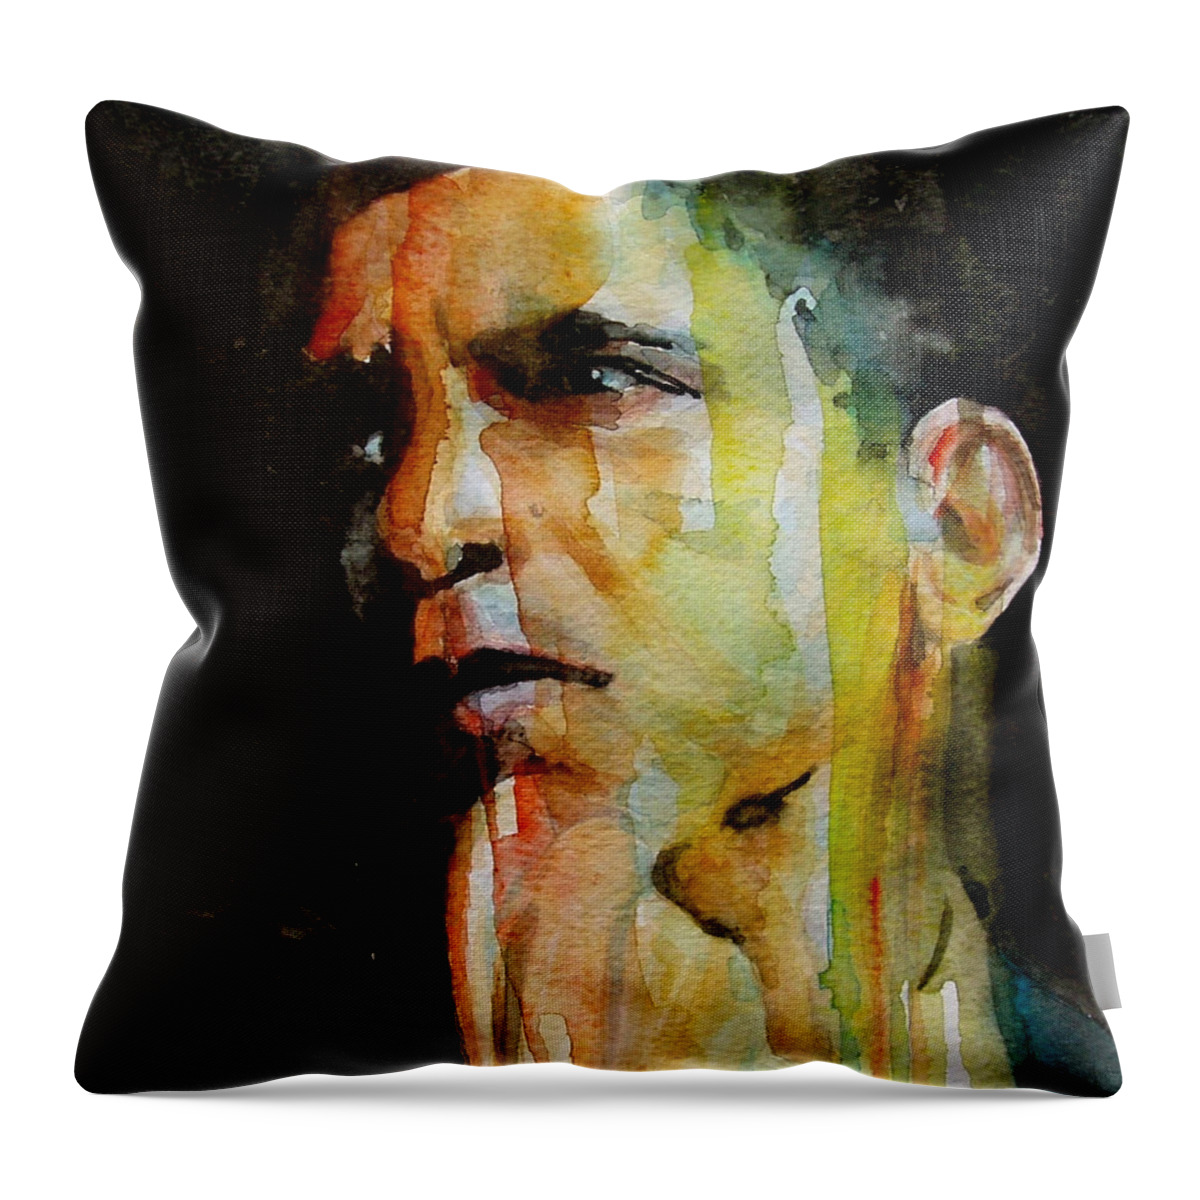 Barack Obama Throw Pillow featuring the painting Obama by Paul Lovering